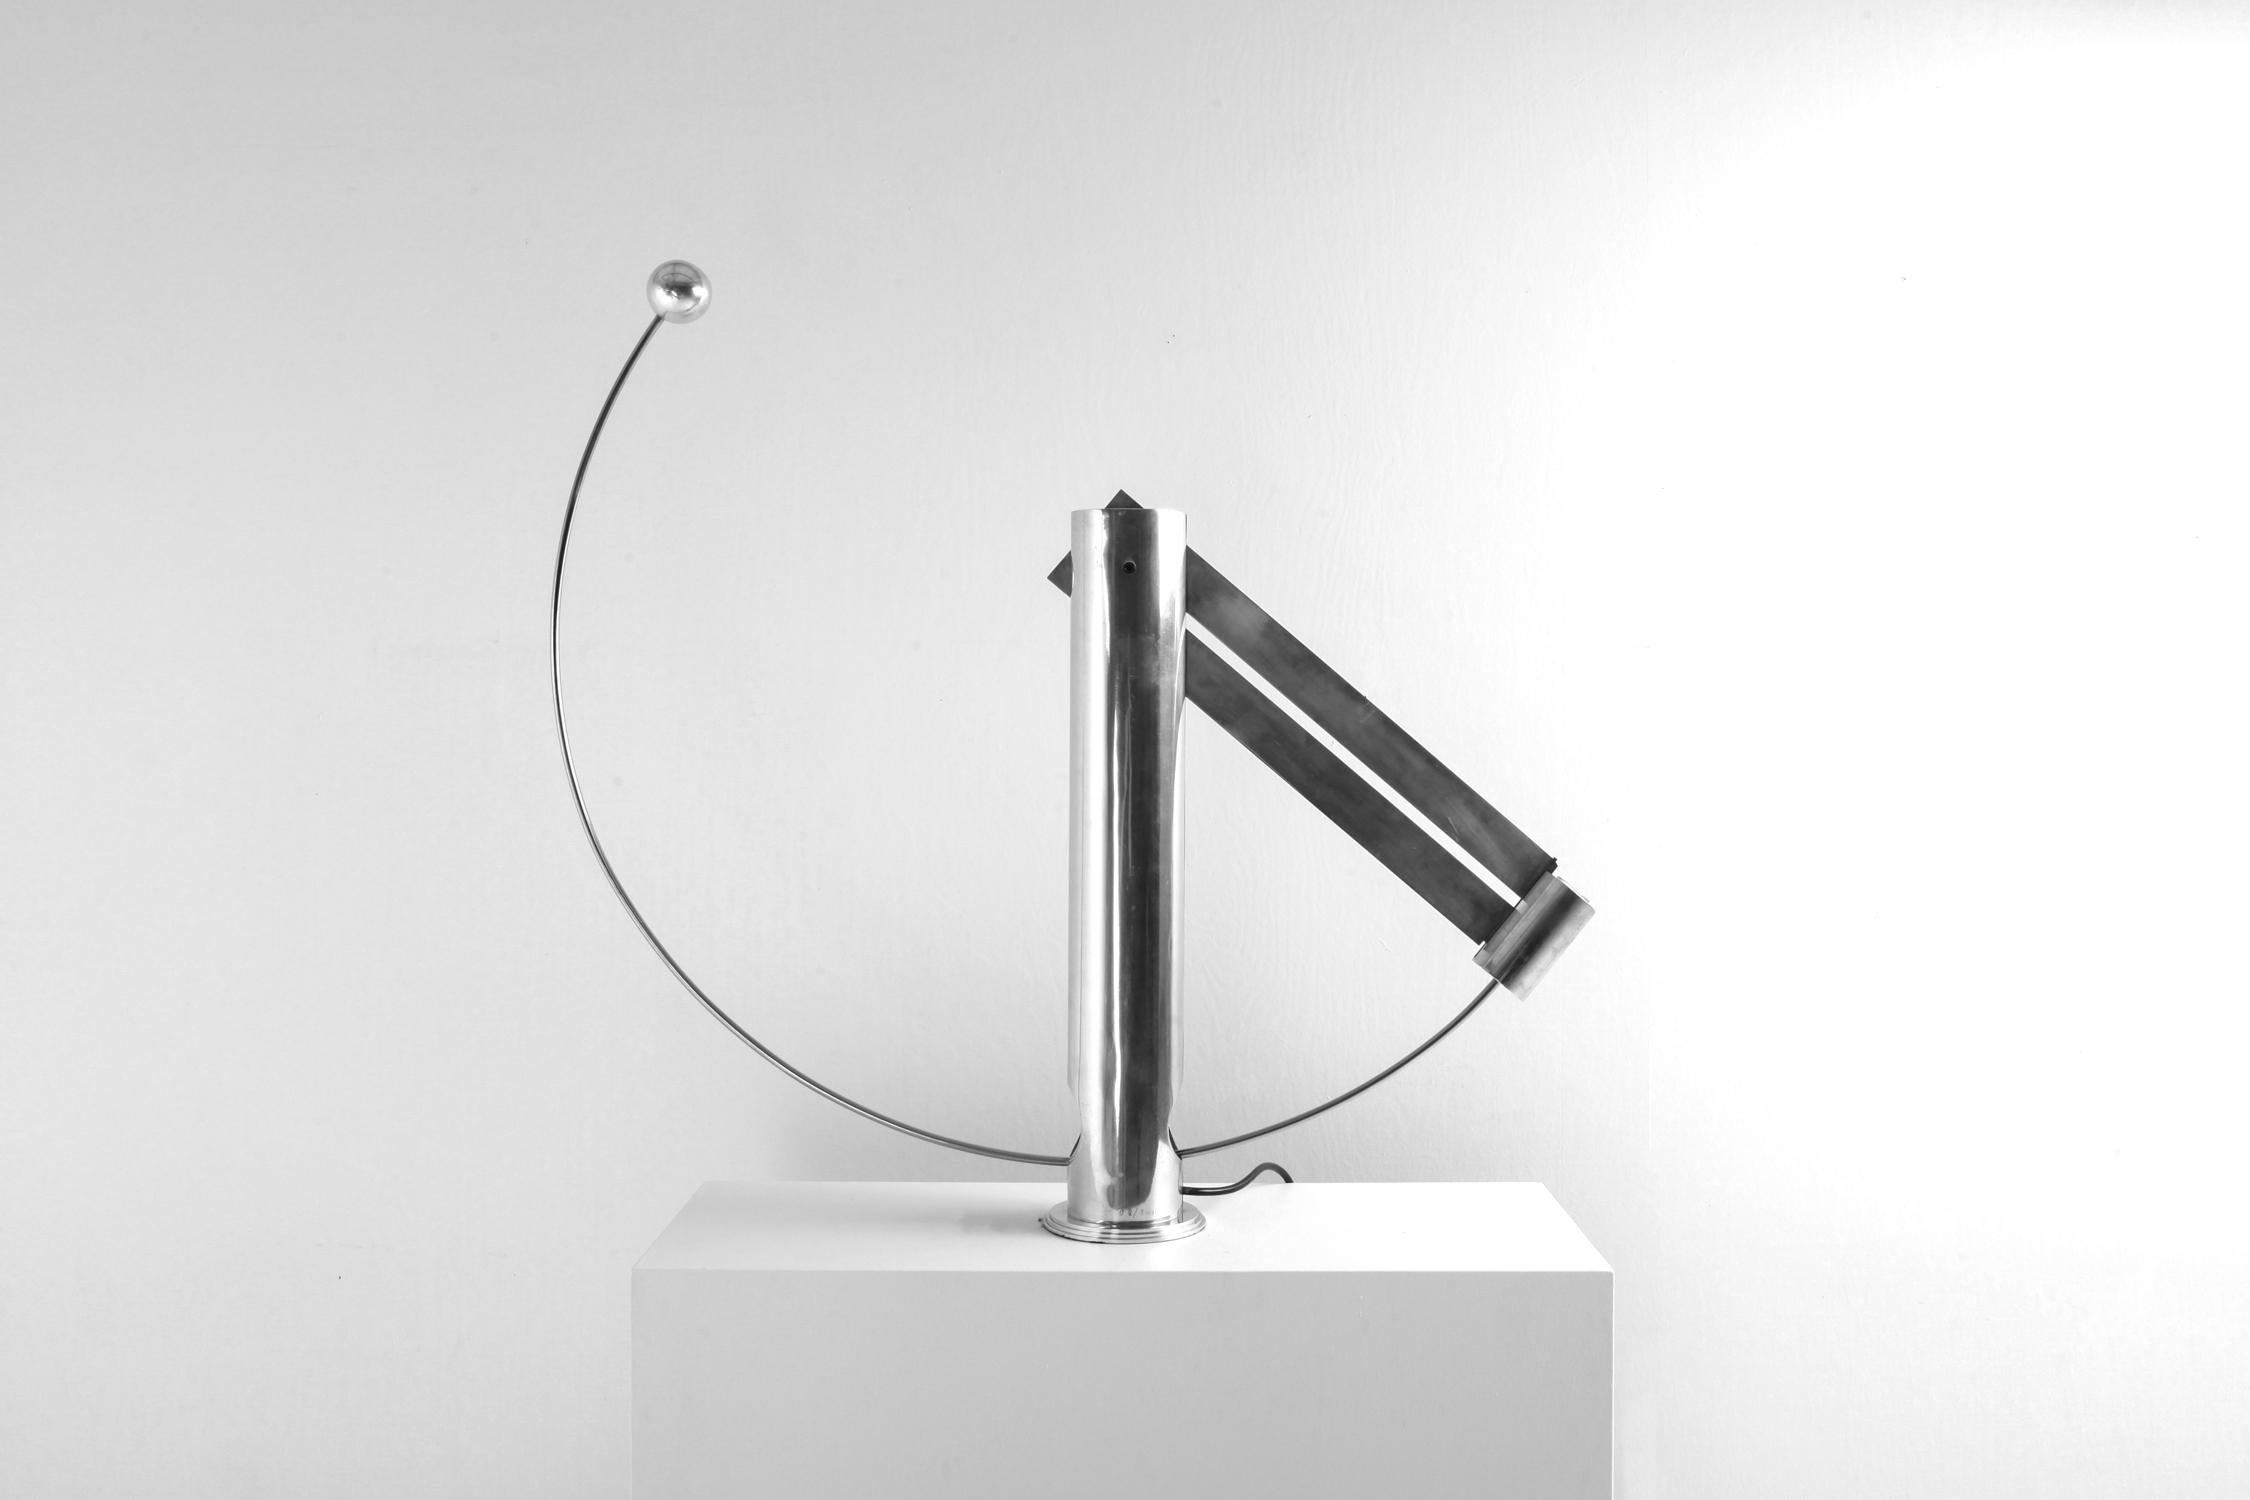 Sculptural floor or table lamp by Pierre Lallemand, Belgium, 1990s
Fascinating design in the style of Maria Pergay
signed and numbered 2/100
Fully adjustable due to the counterweight balance.
A very well designed limited edition piece
Probably